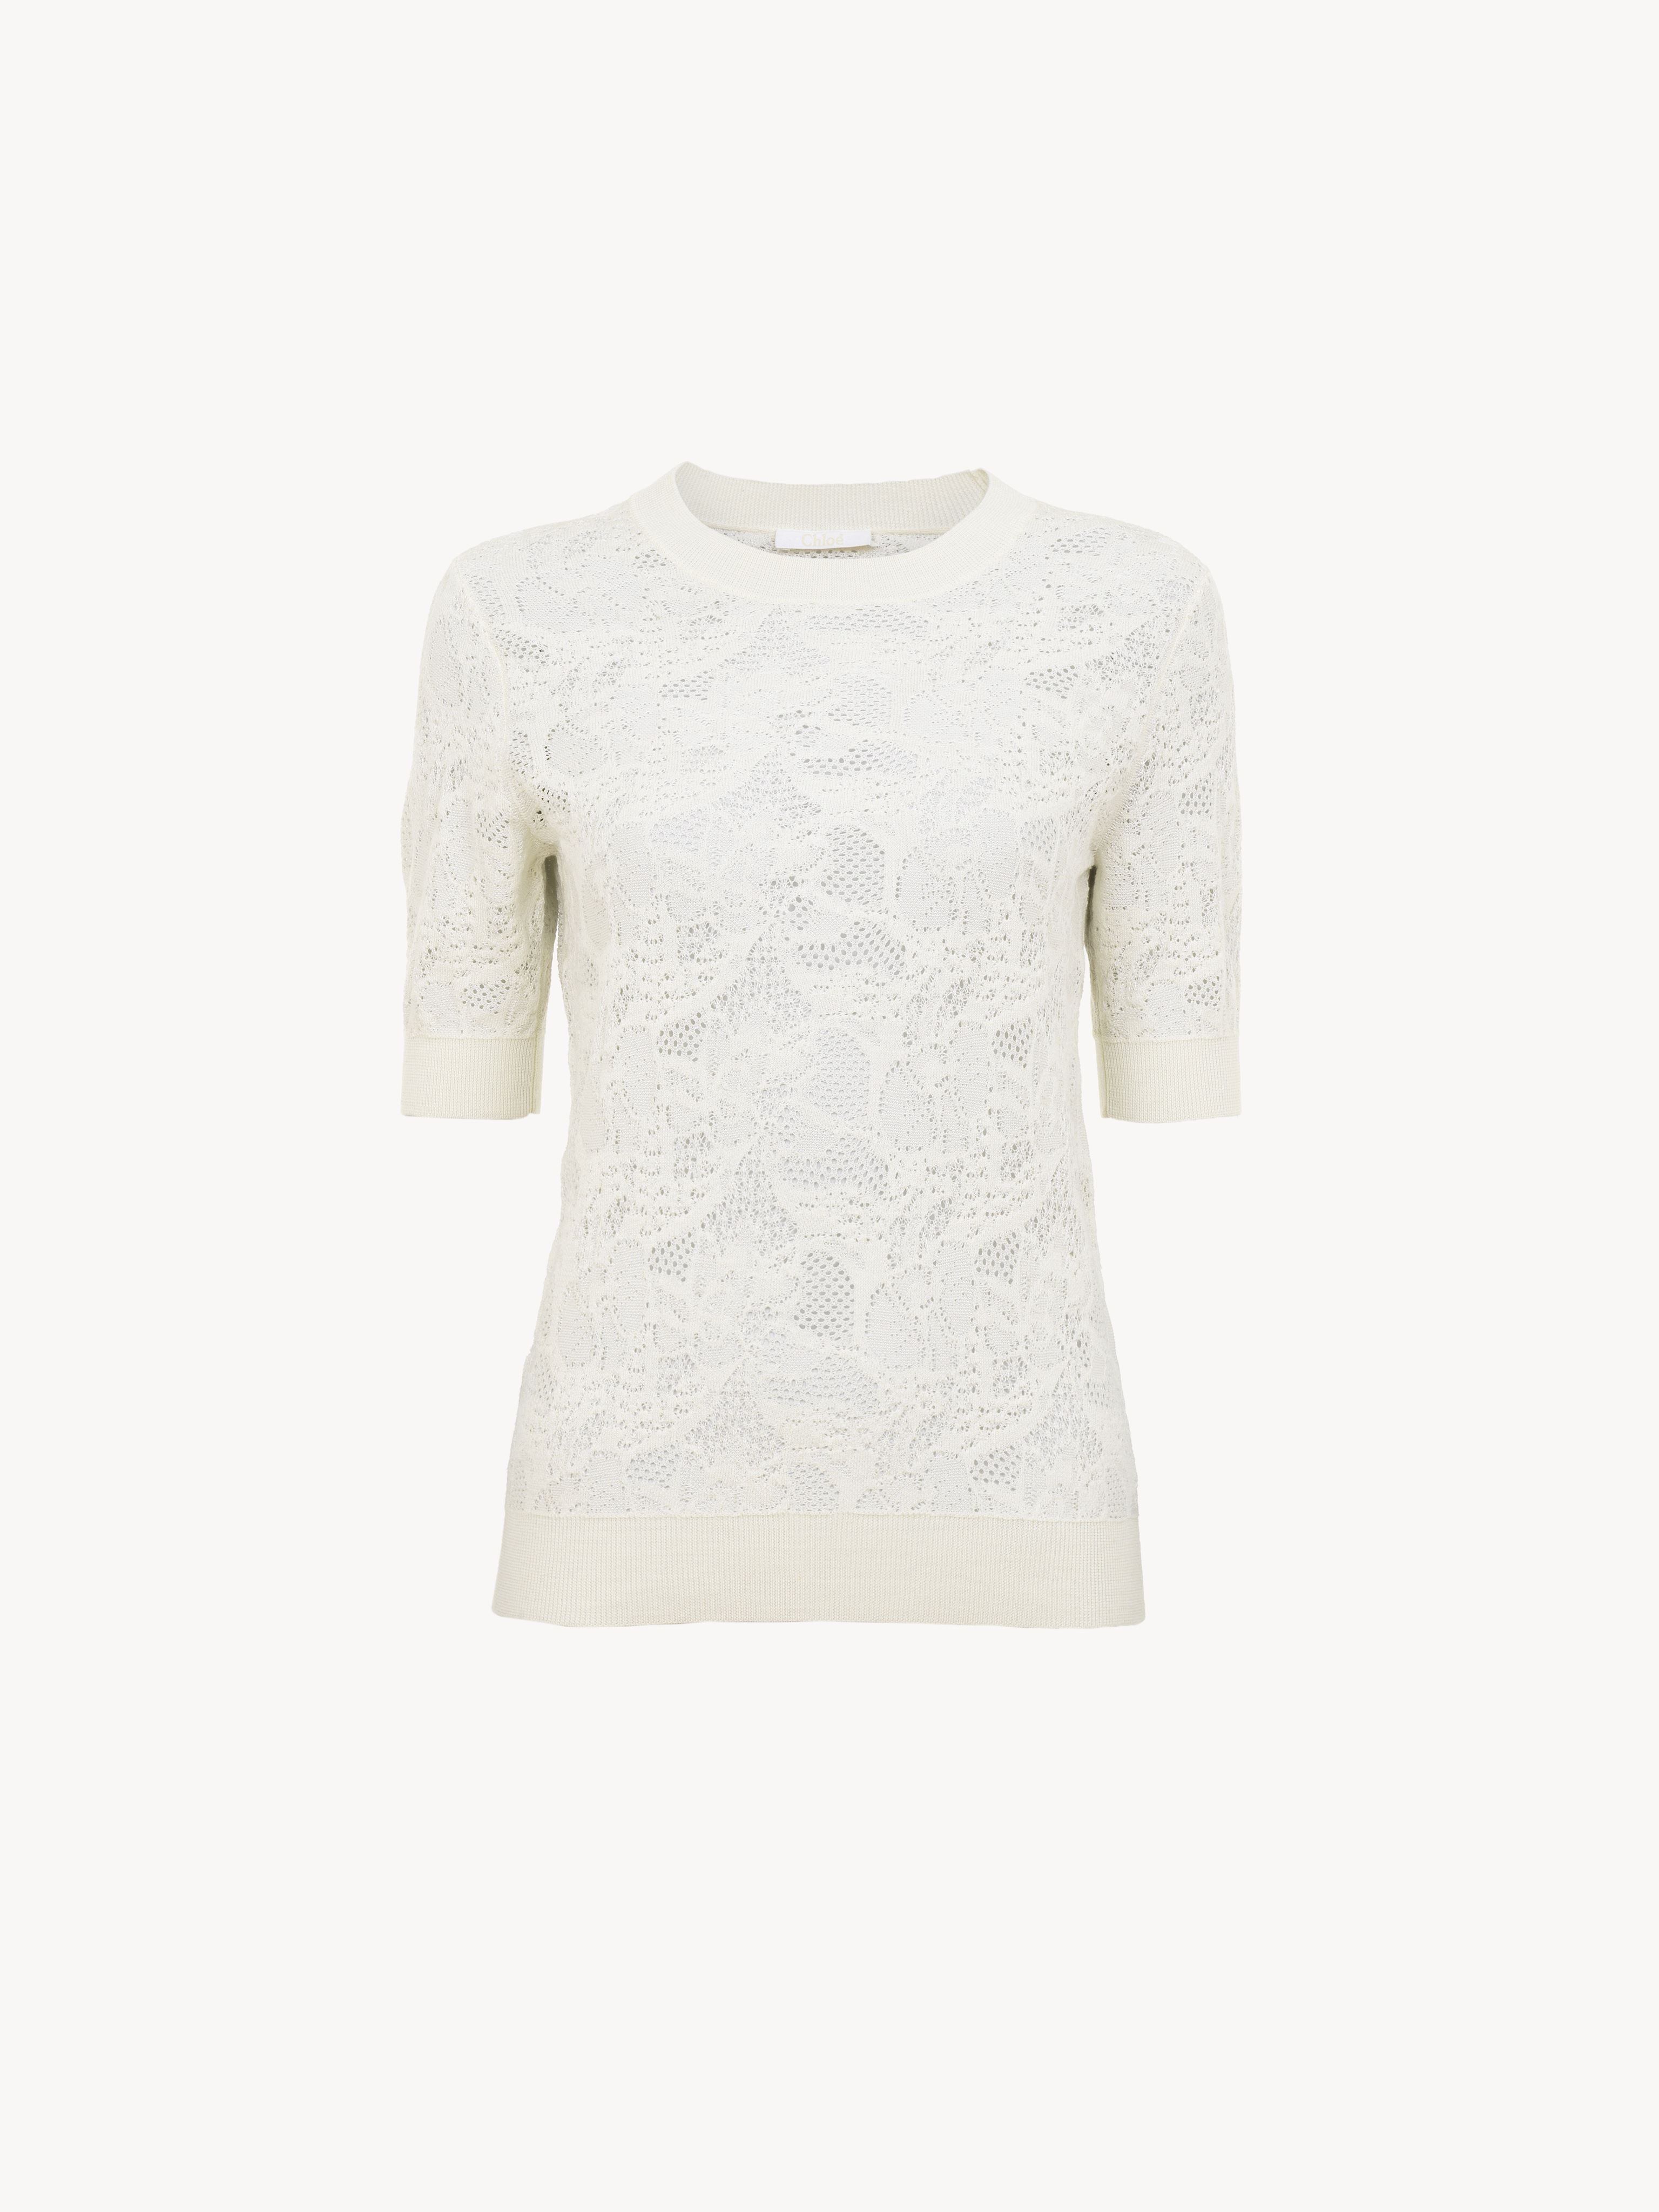 Chloé Pull Manches Courtes Col Rond Femme Blanc Taille M 100% Laine